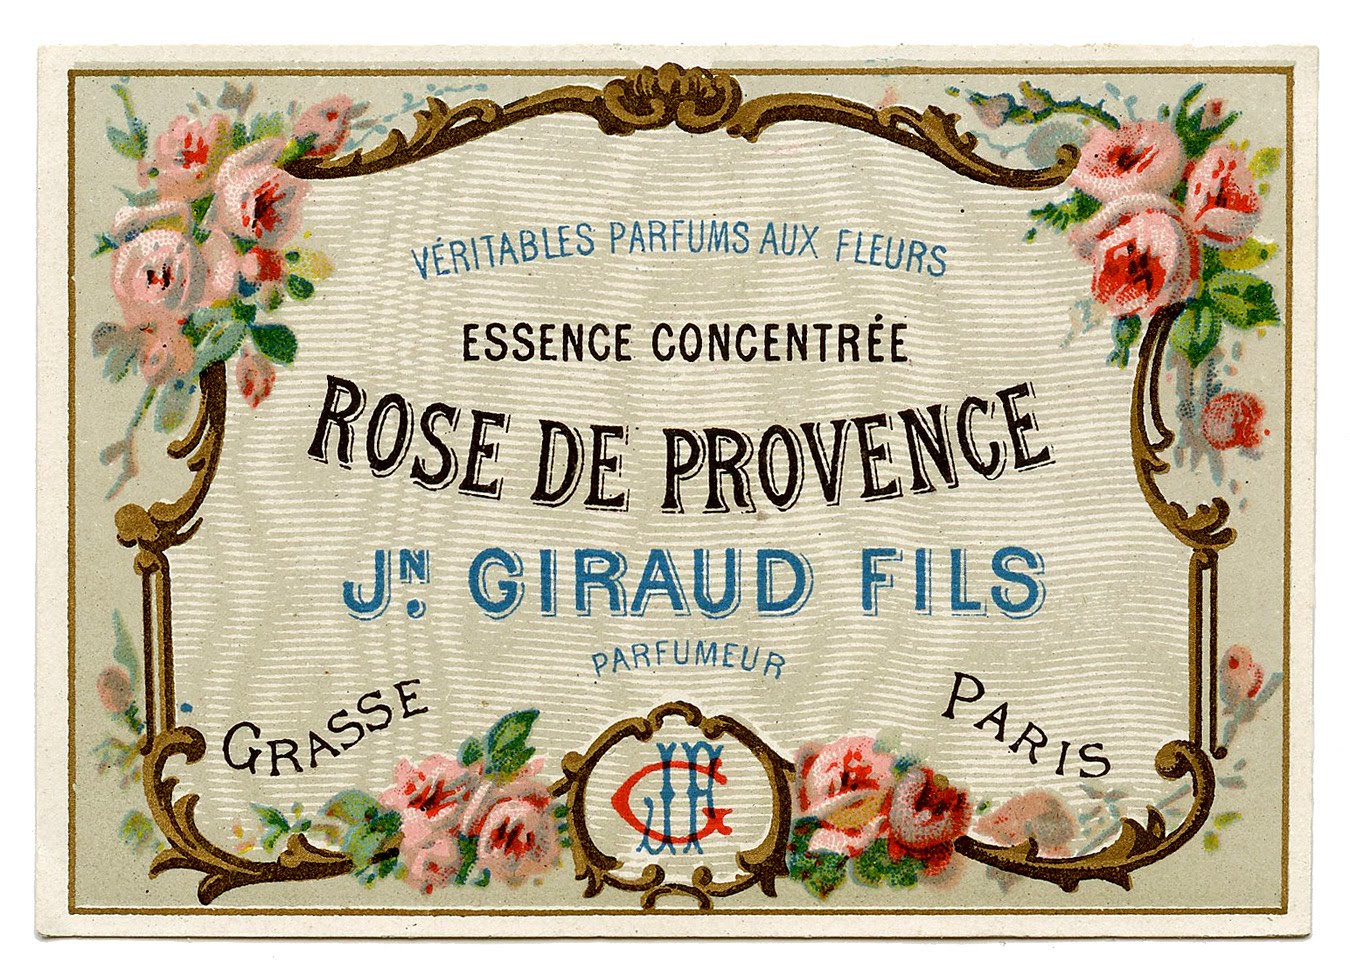 Vintage Clip Art   Pretty French Perfume Label   Frame   The Graphics    